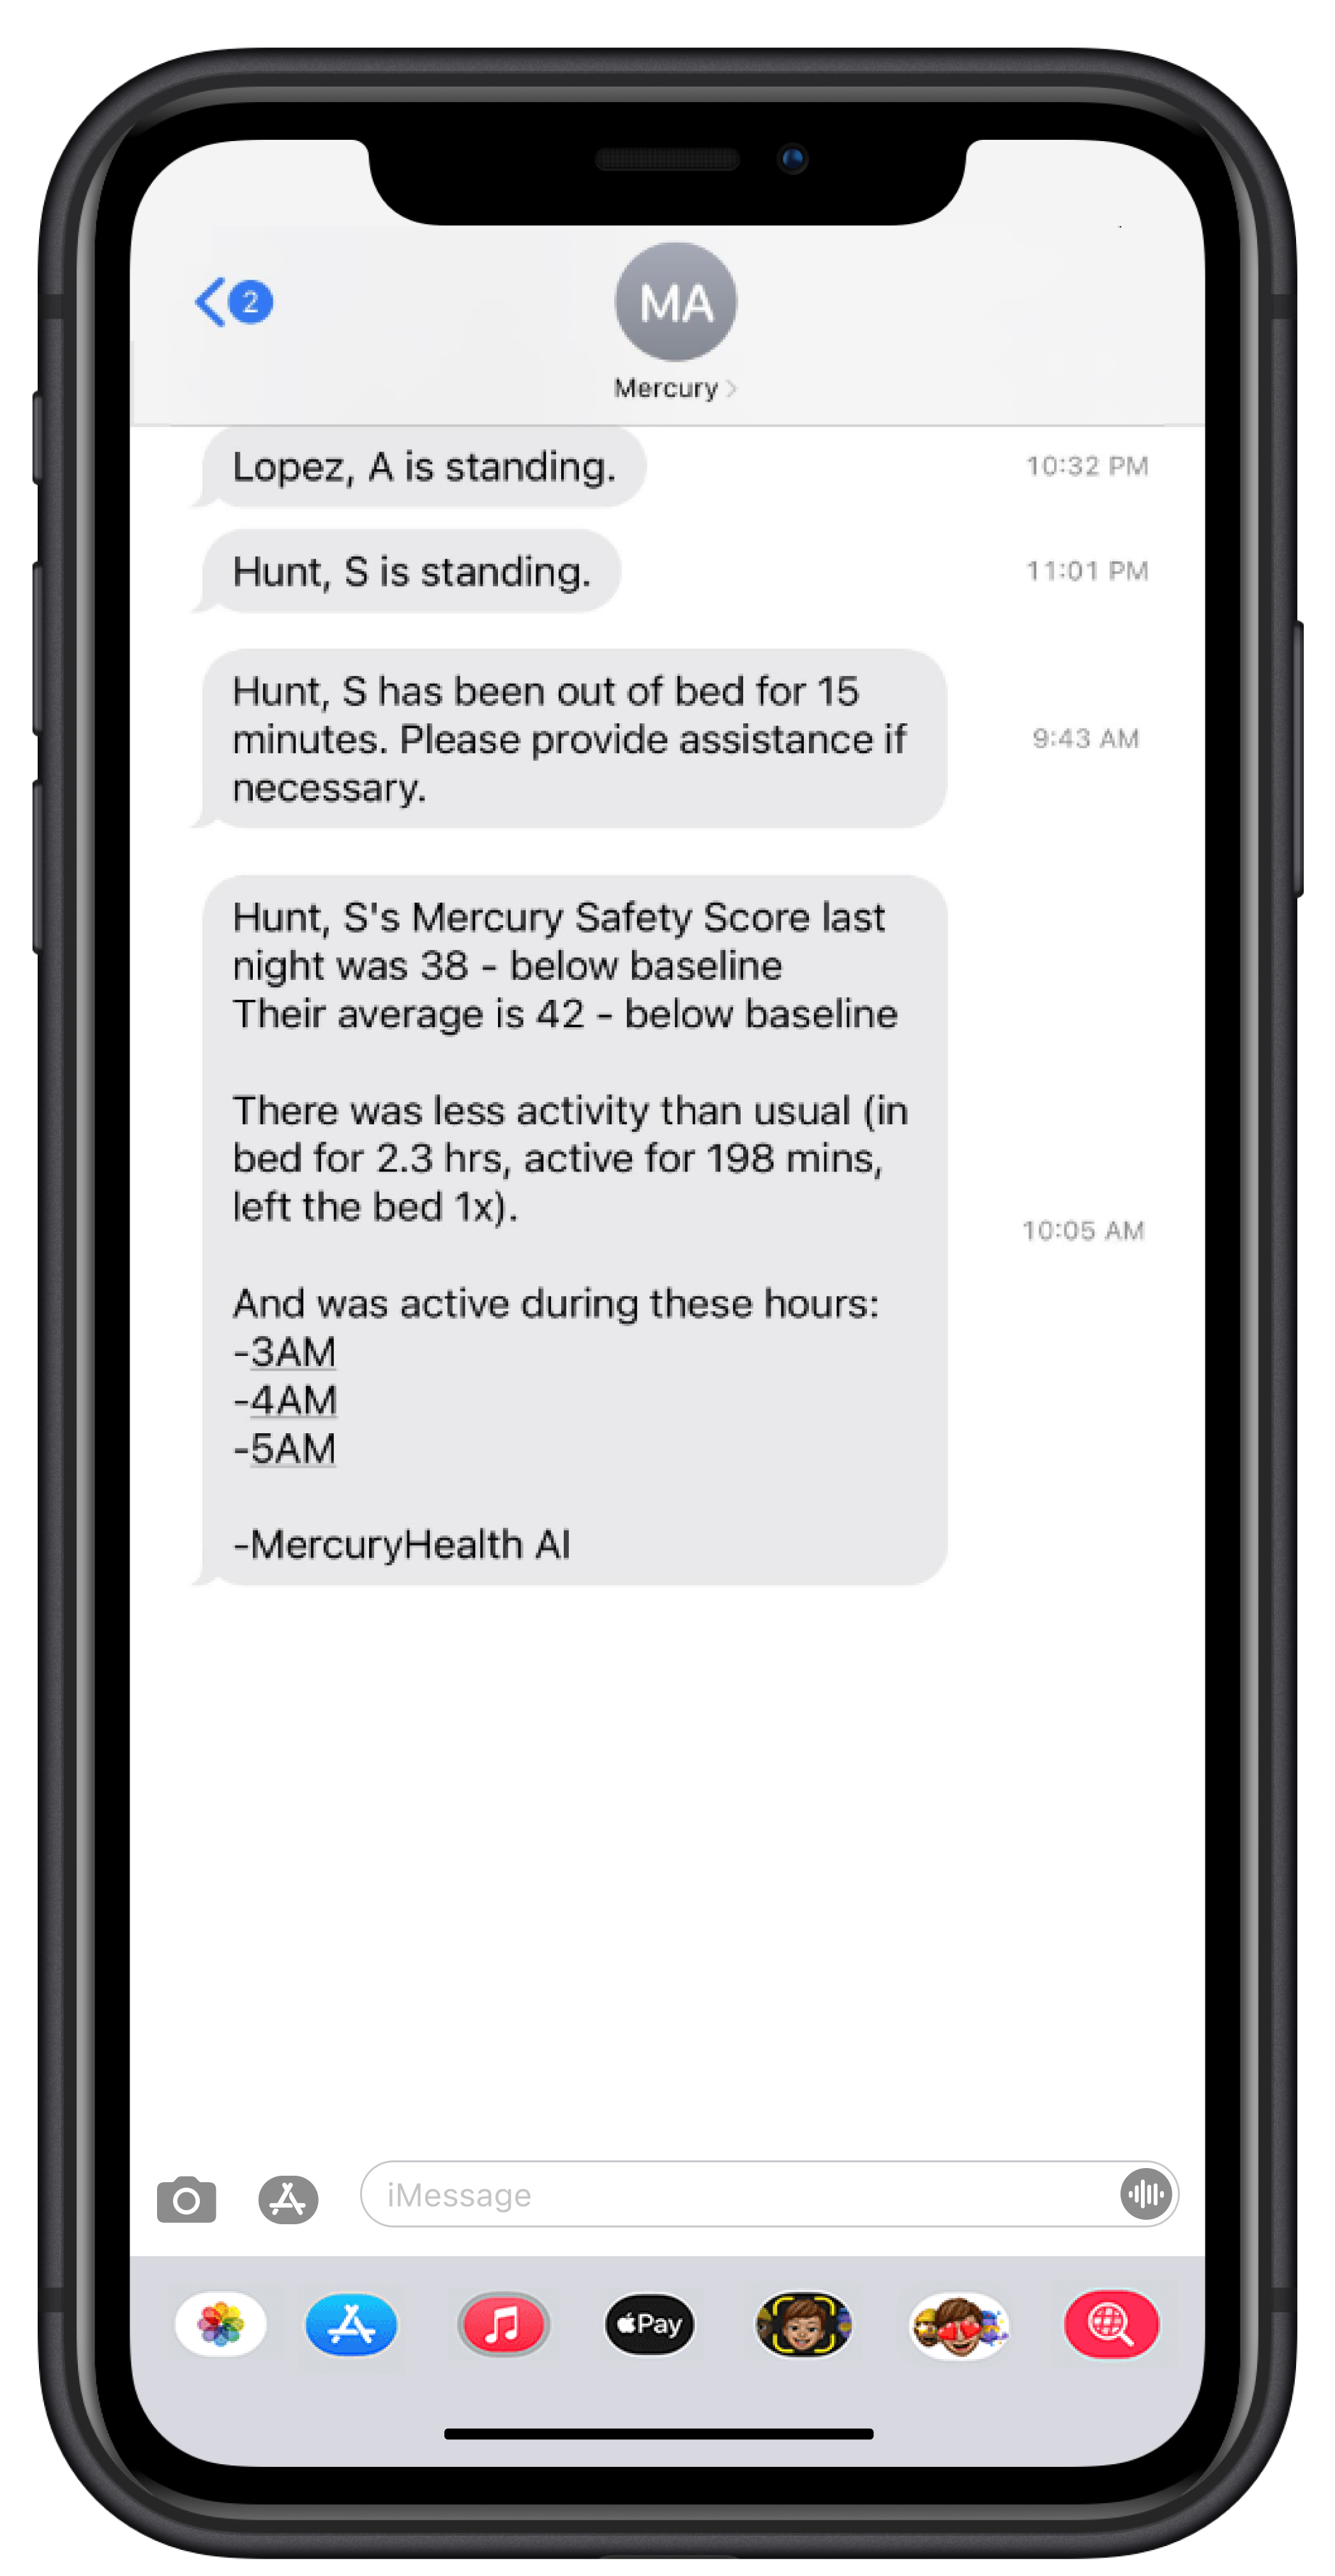 Mobile Alerts through messages